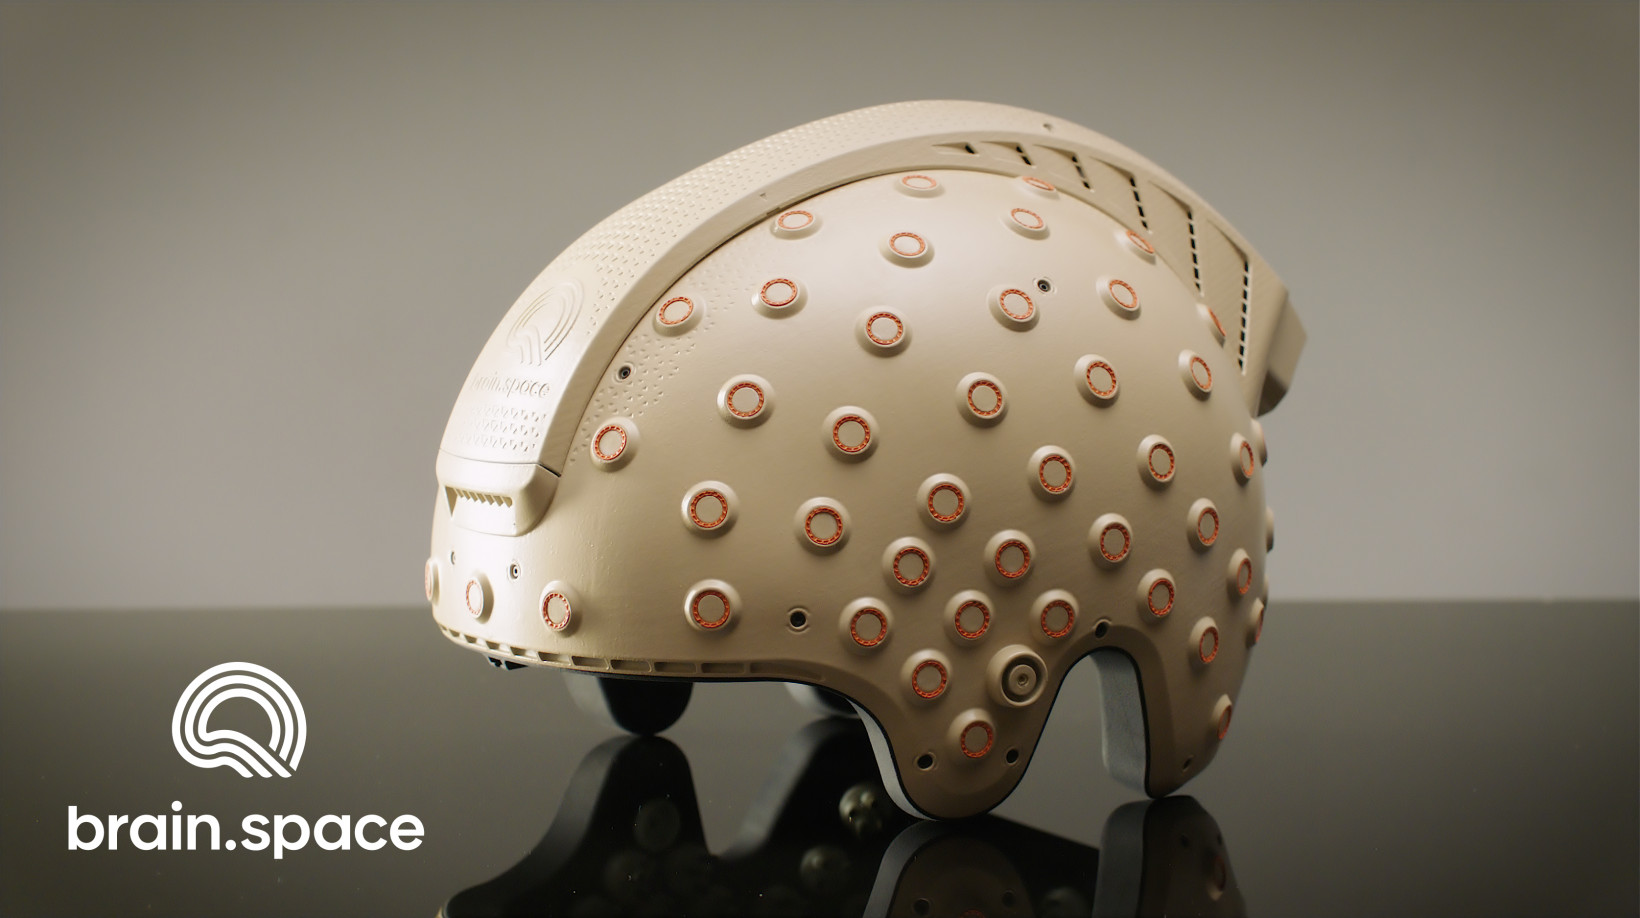 The Brain.Space EEG headset is heading to the ISS